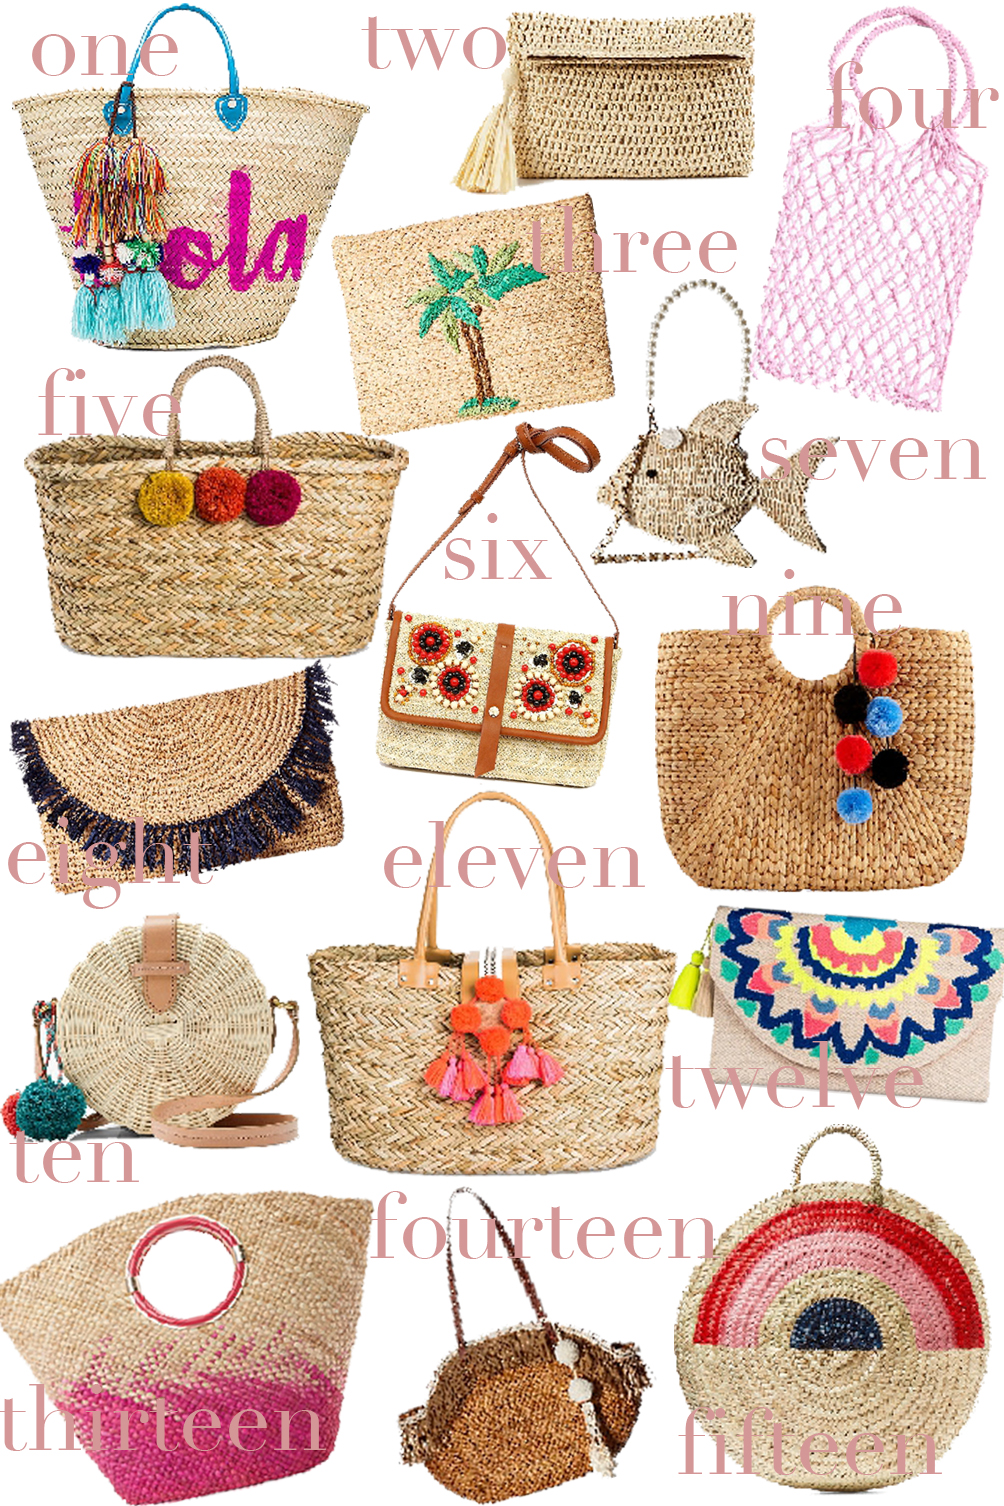 straw bags - styling the woven trend - One Brass Fox